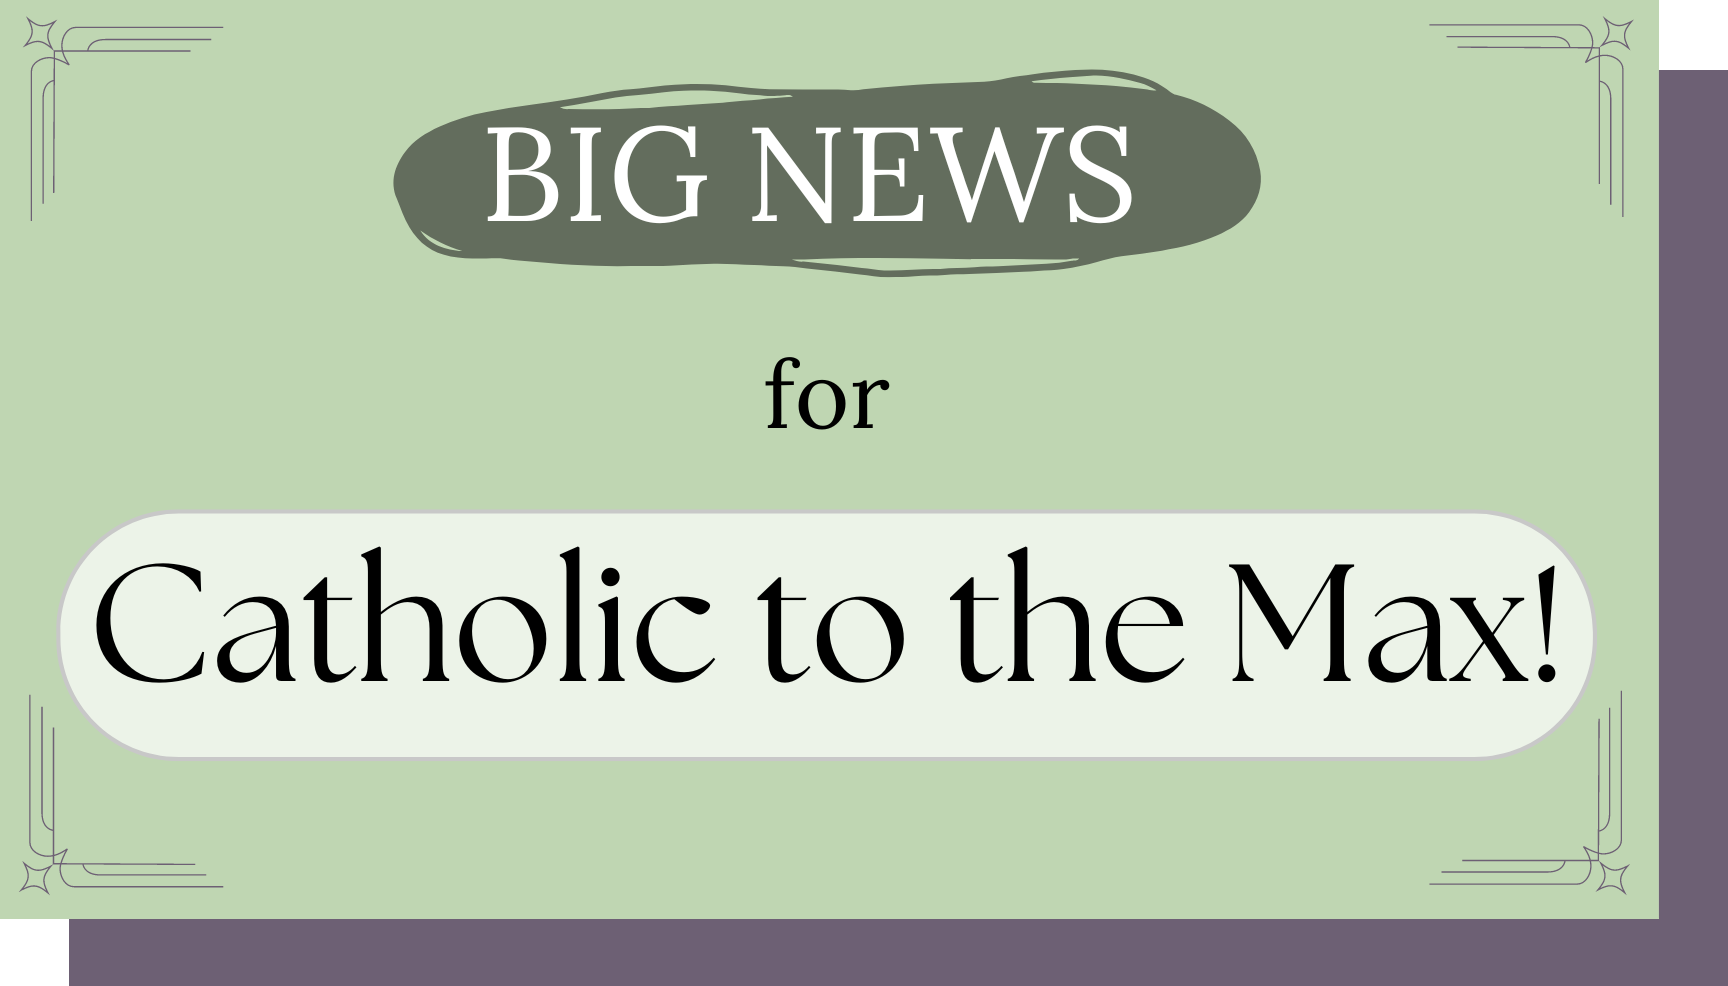 BIG NEWS for Catholic to the Max!